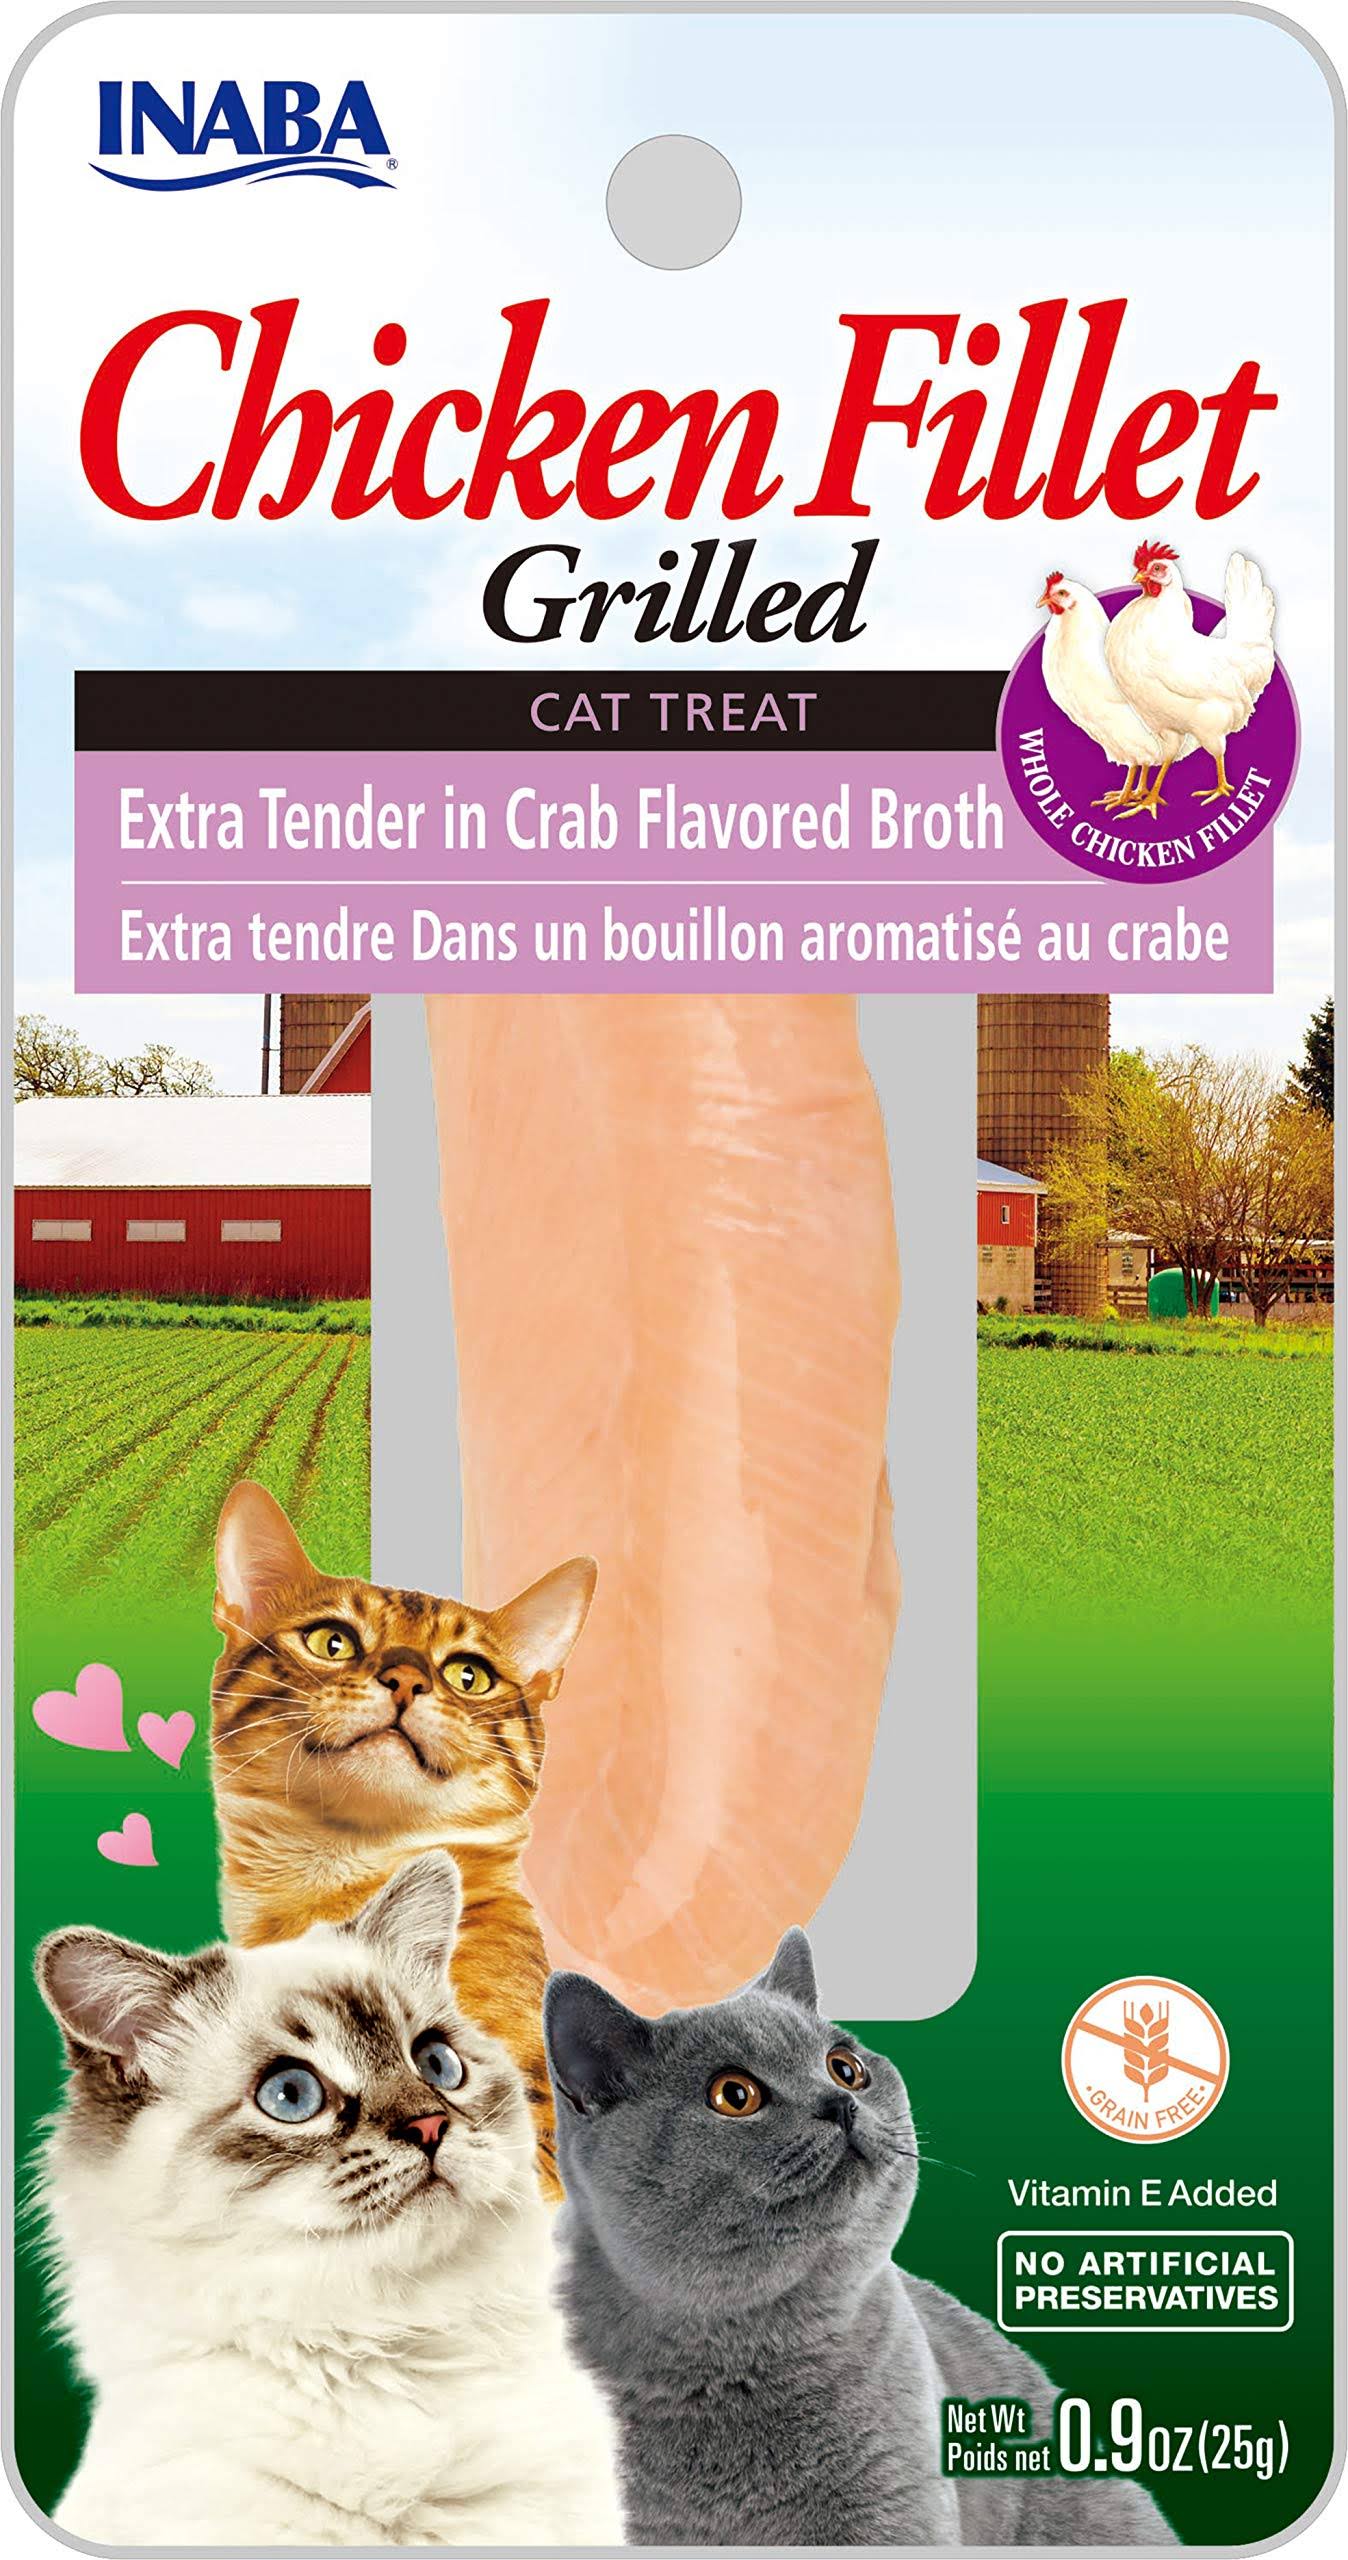 Inaba Grilled Chicken Fillet Grain Free Cat Treat - Extra Tender in Crab Broth - 0.9 oz